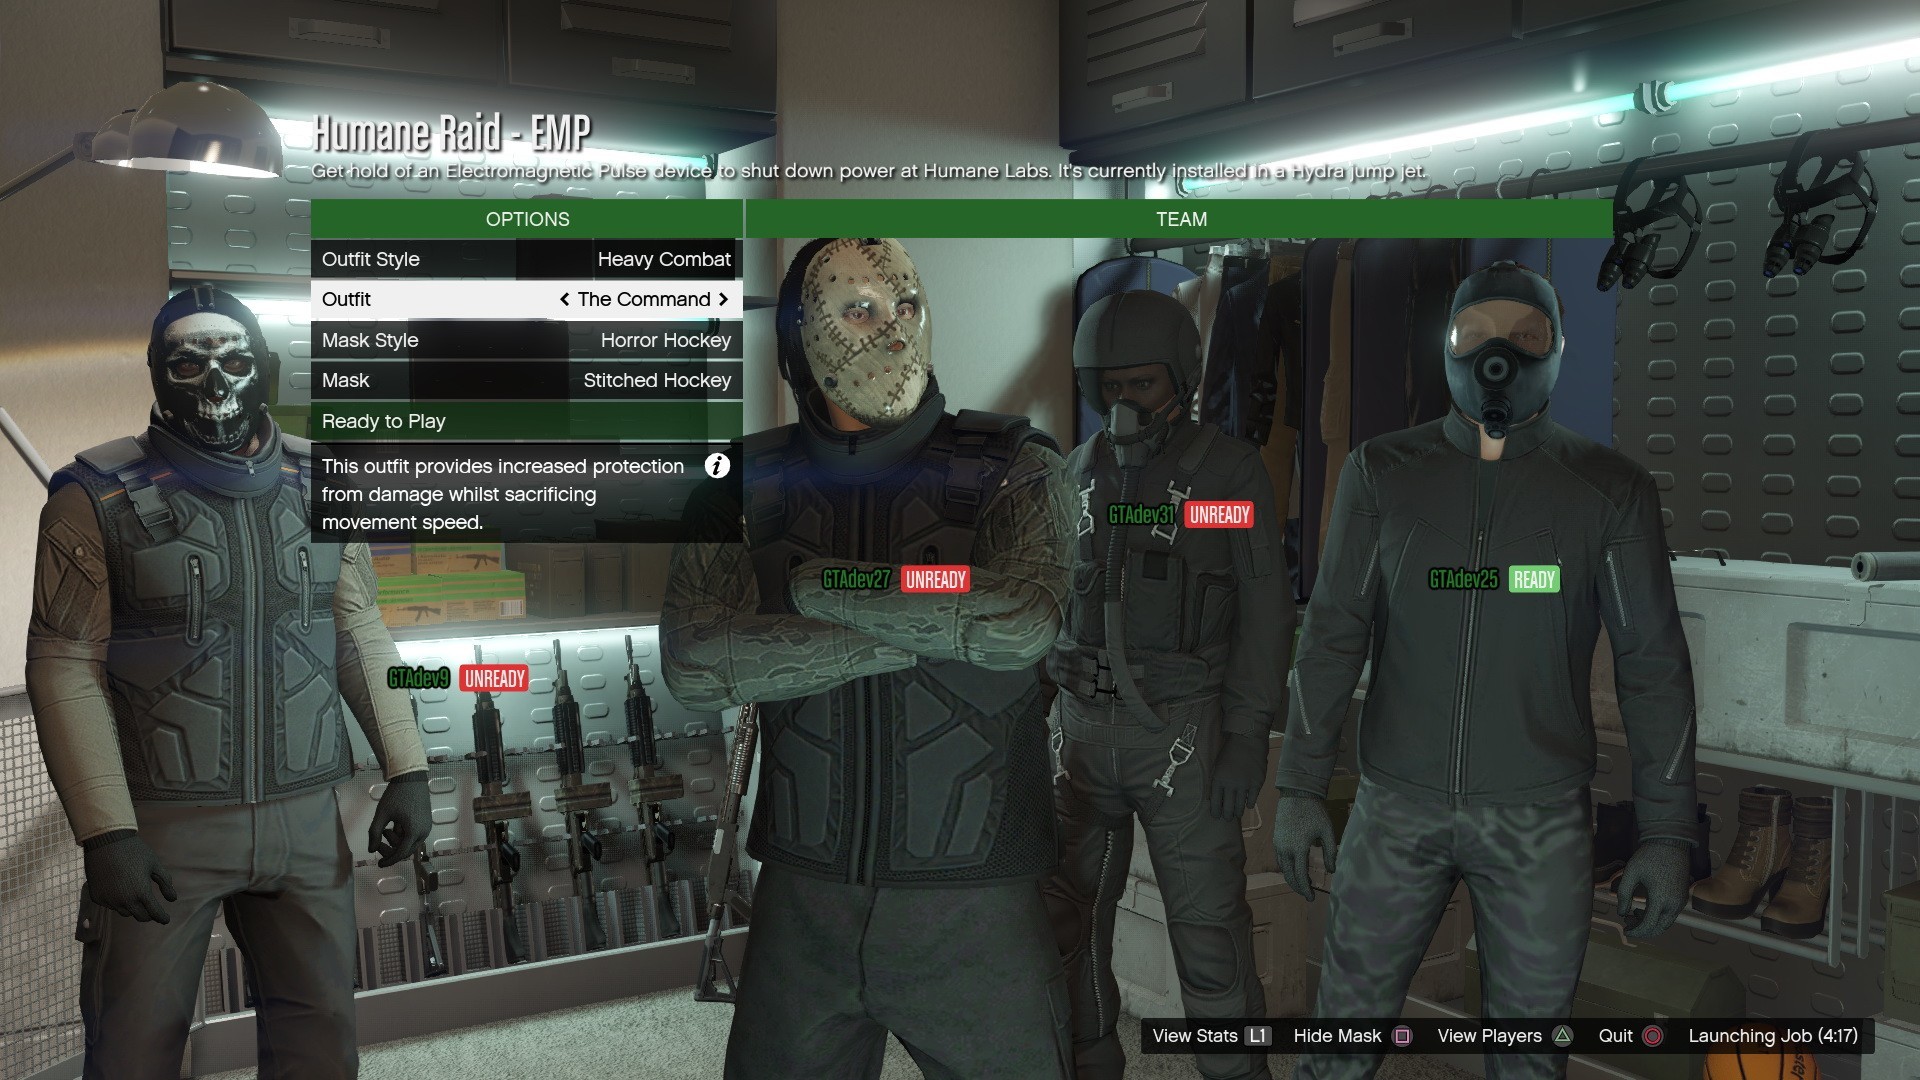 Grand Theft Auto online matchmaking